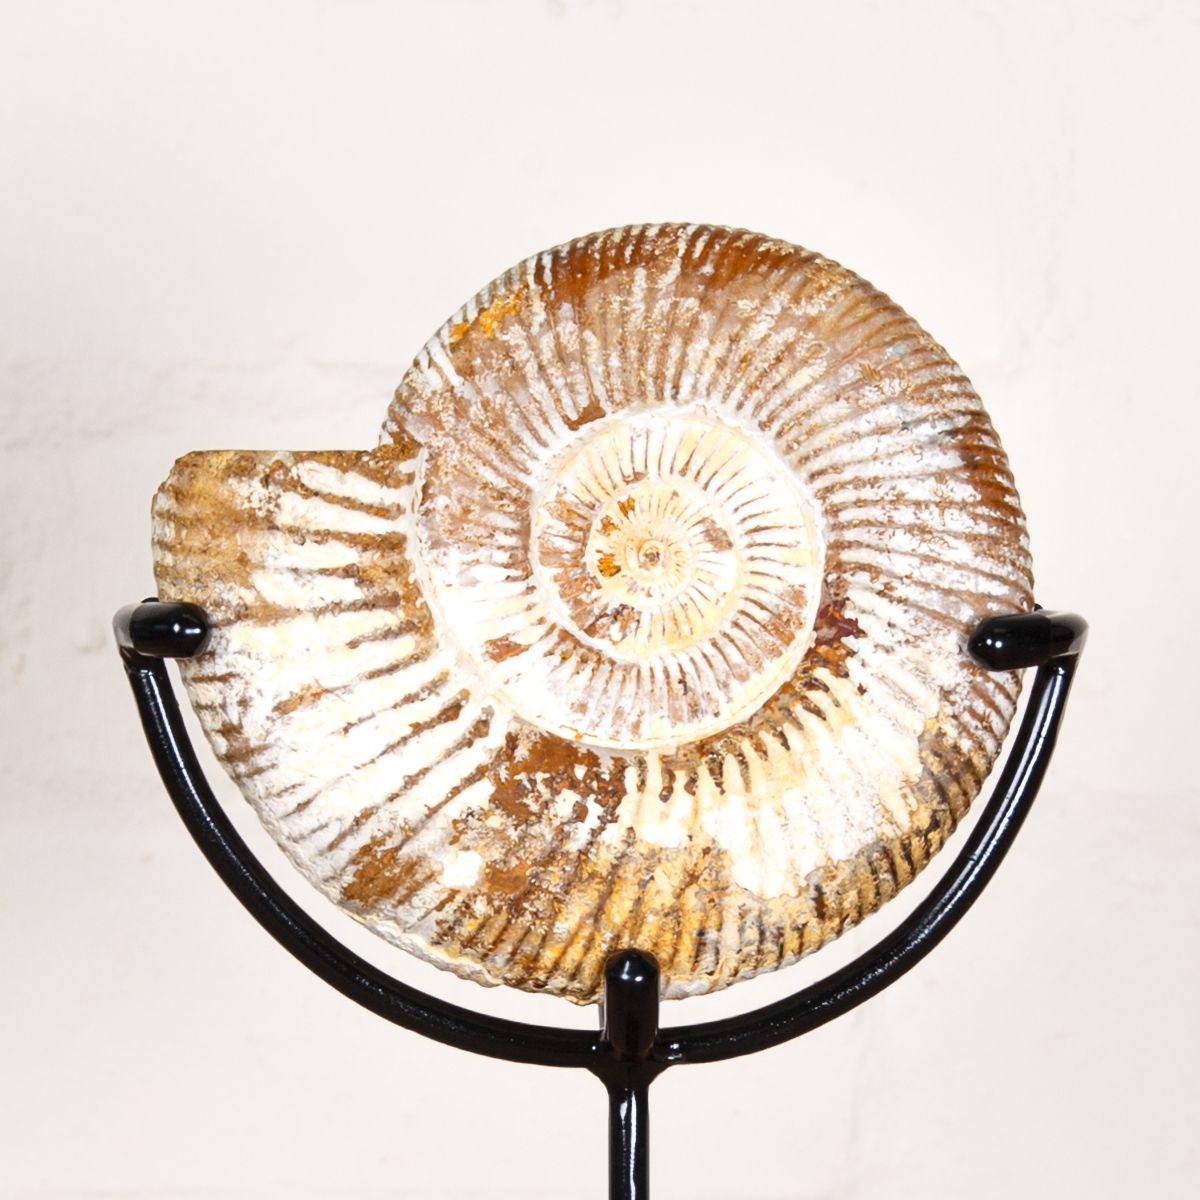 5 inch White Spine Ammonite Fossil on Stand (Cleoniceras sp)